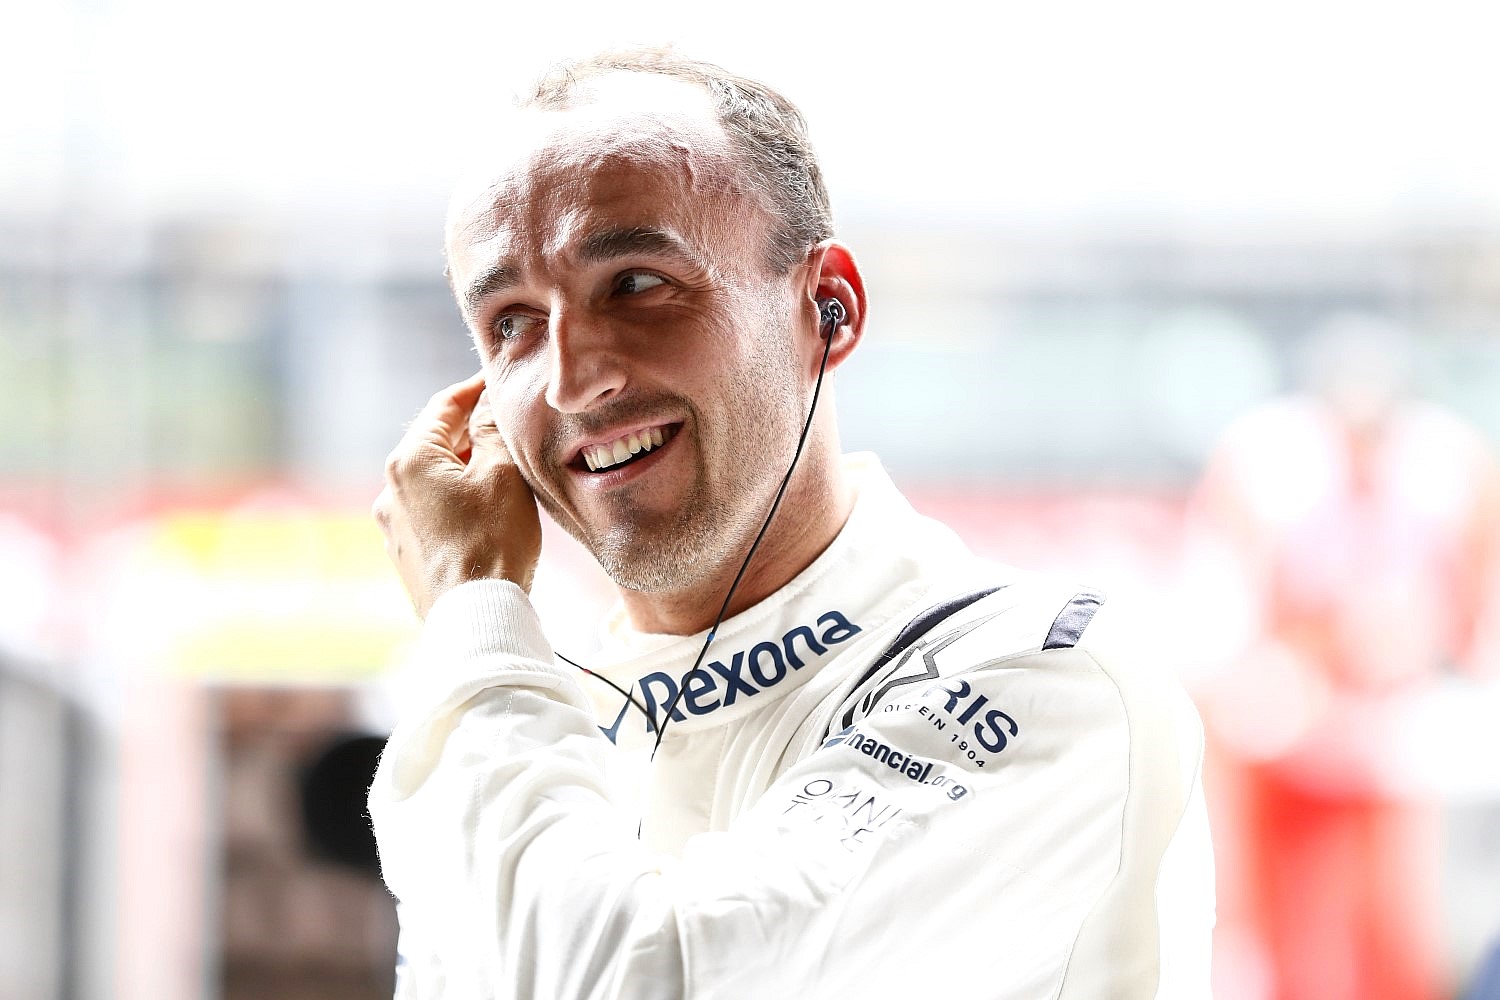 Kubica to get 2nd Williams seat